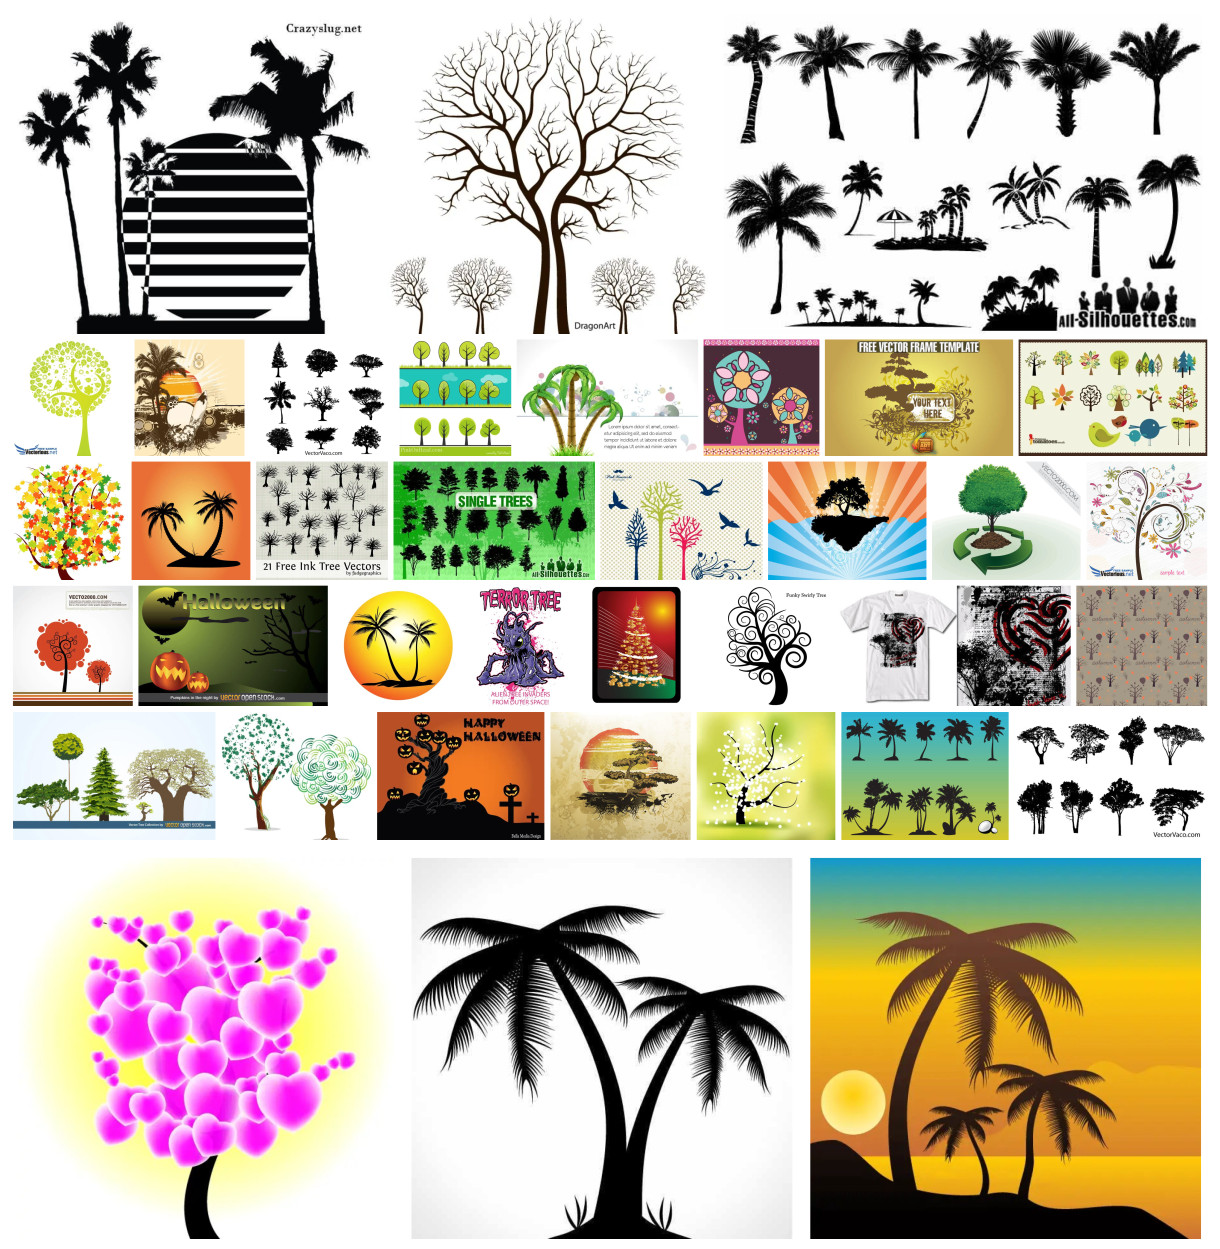 A Creative Compilation of 35+ Tree Vector Designs